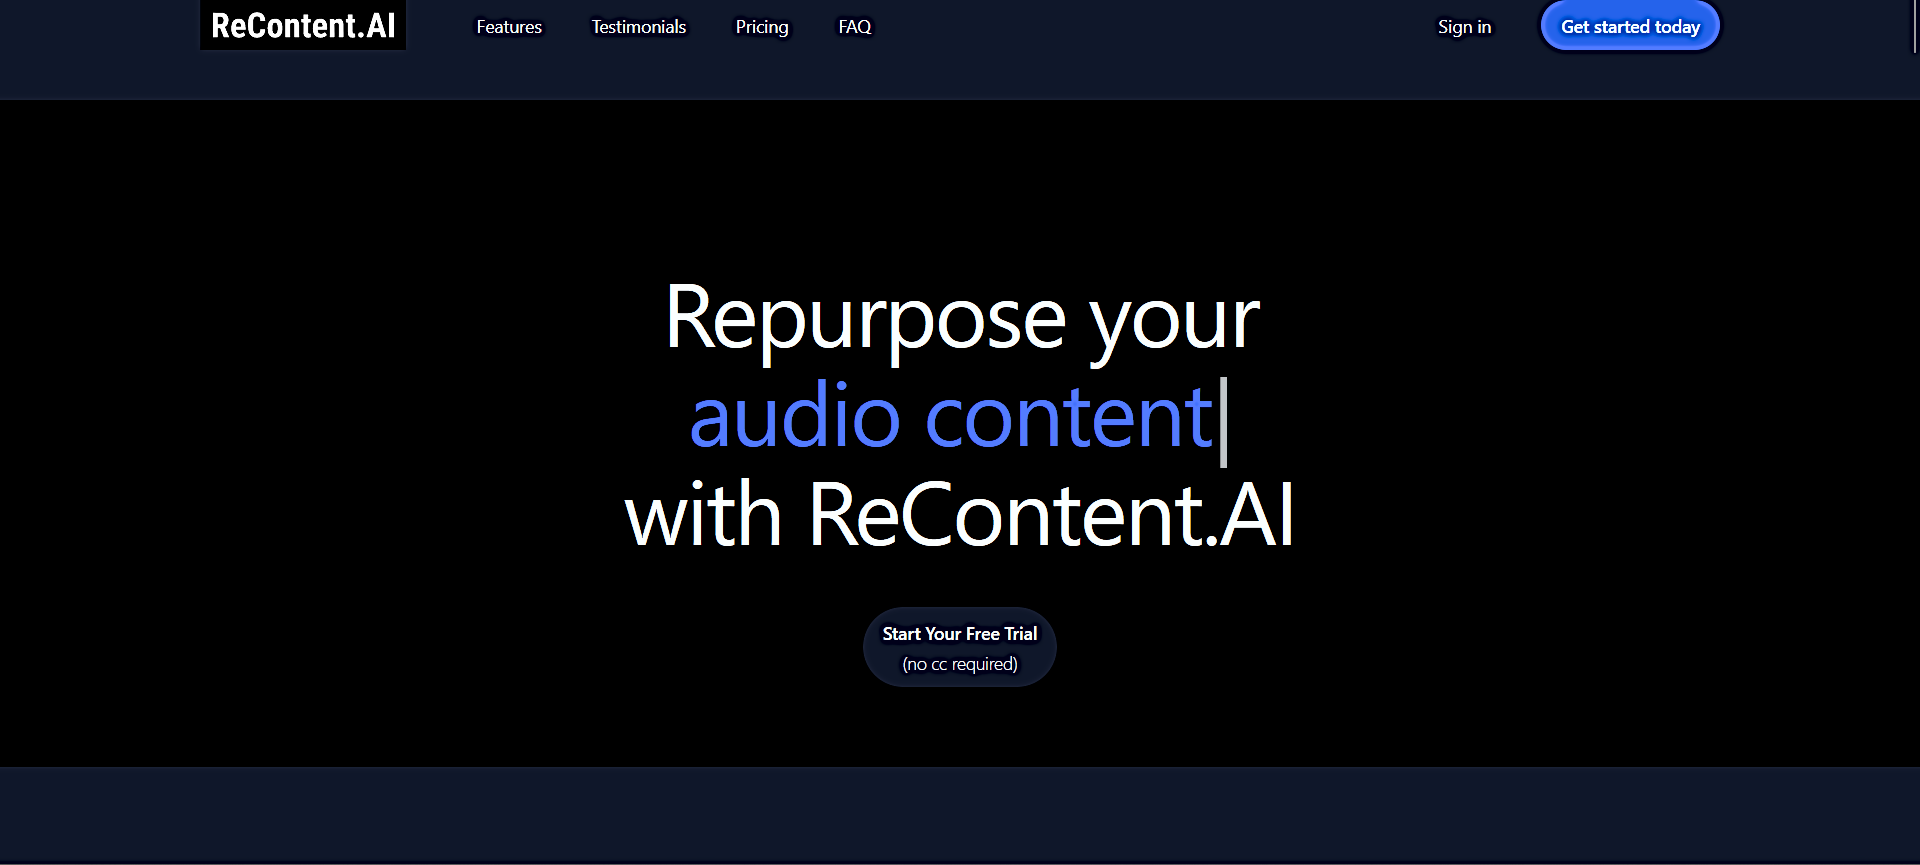 ReContent.AI featured